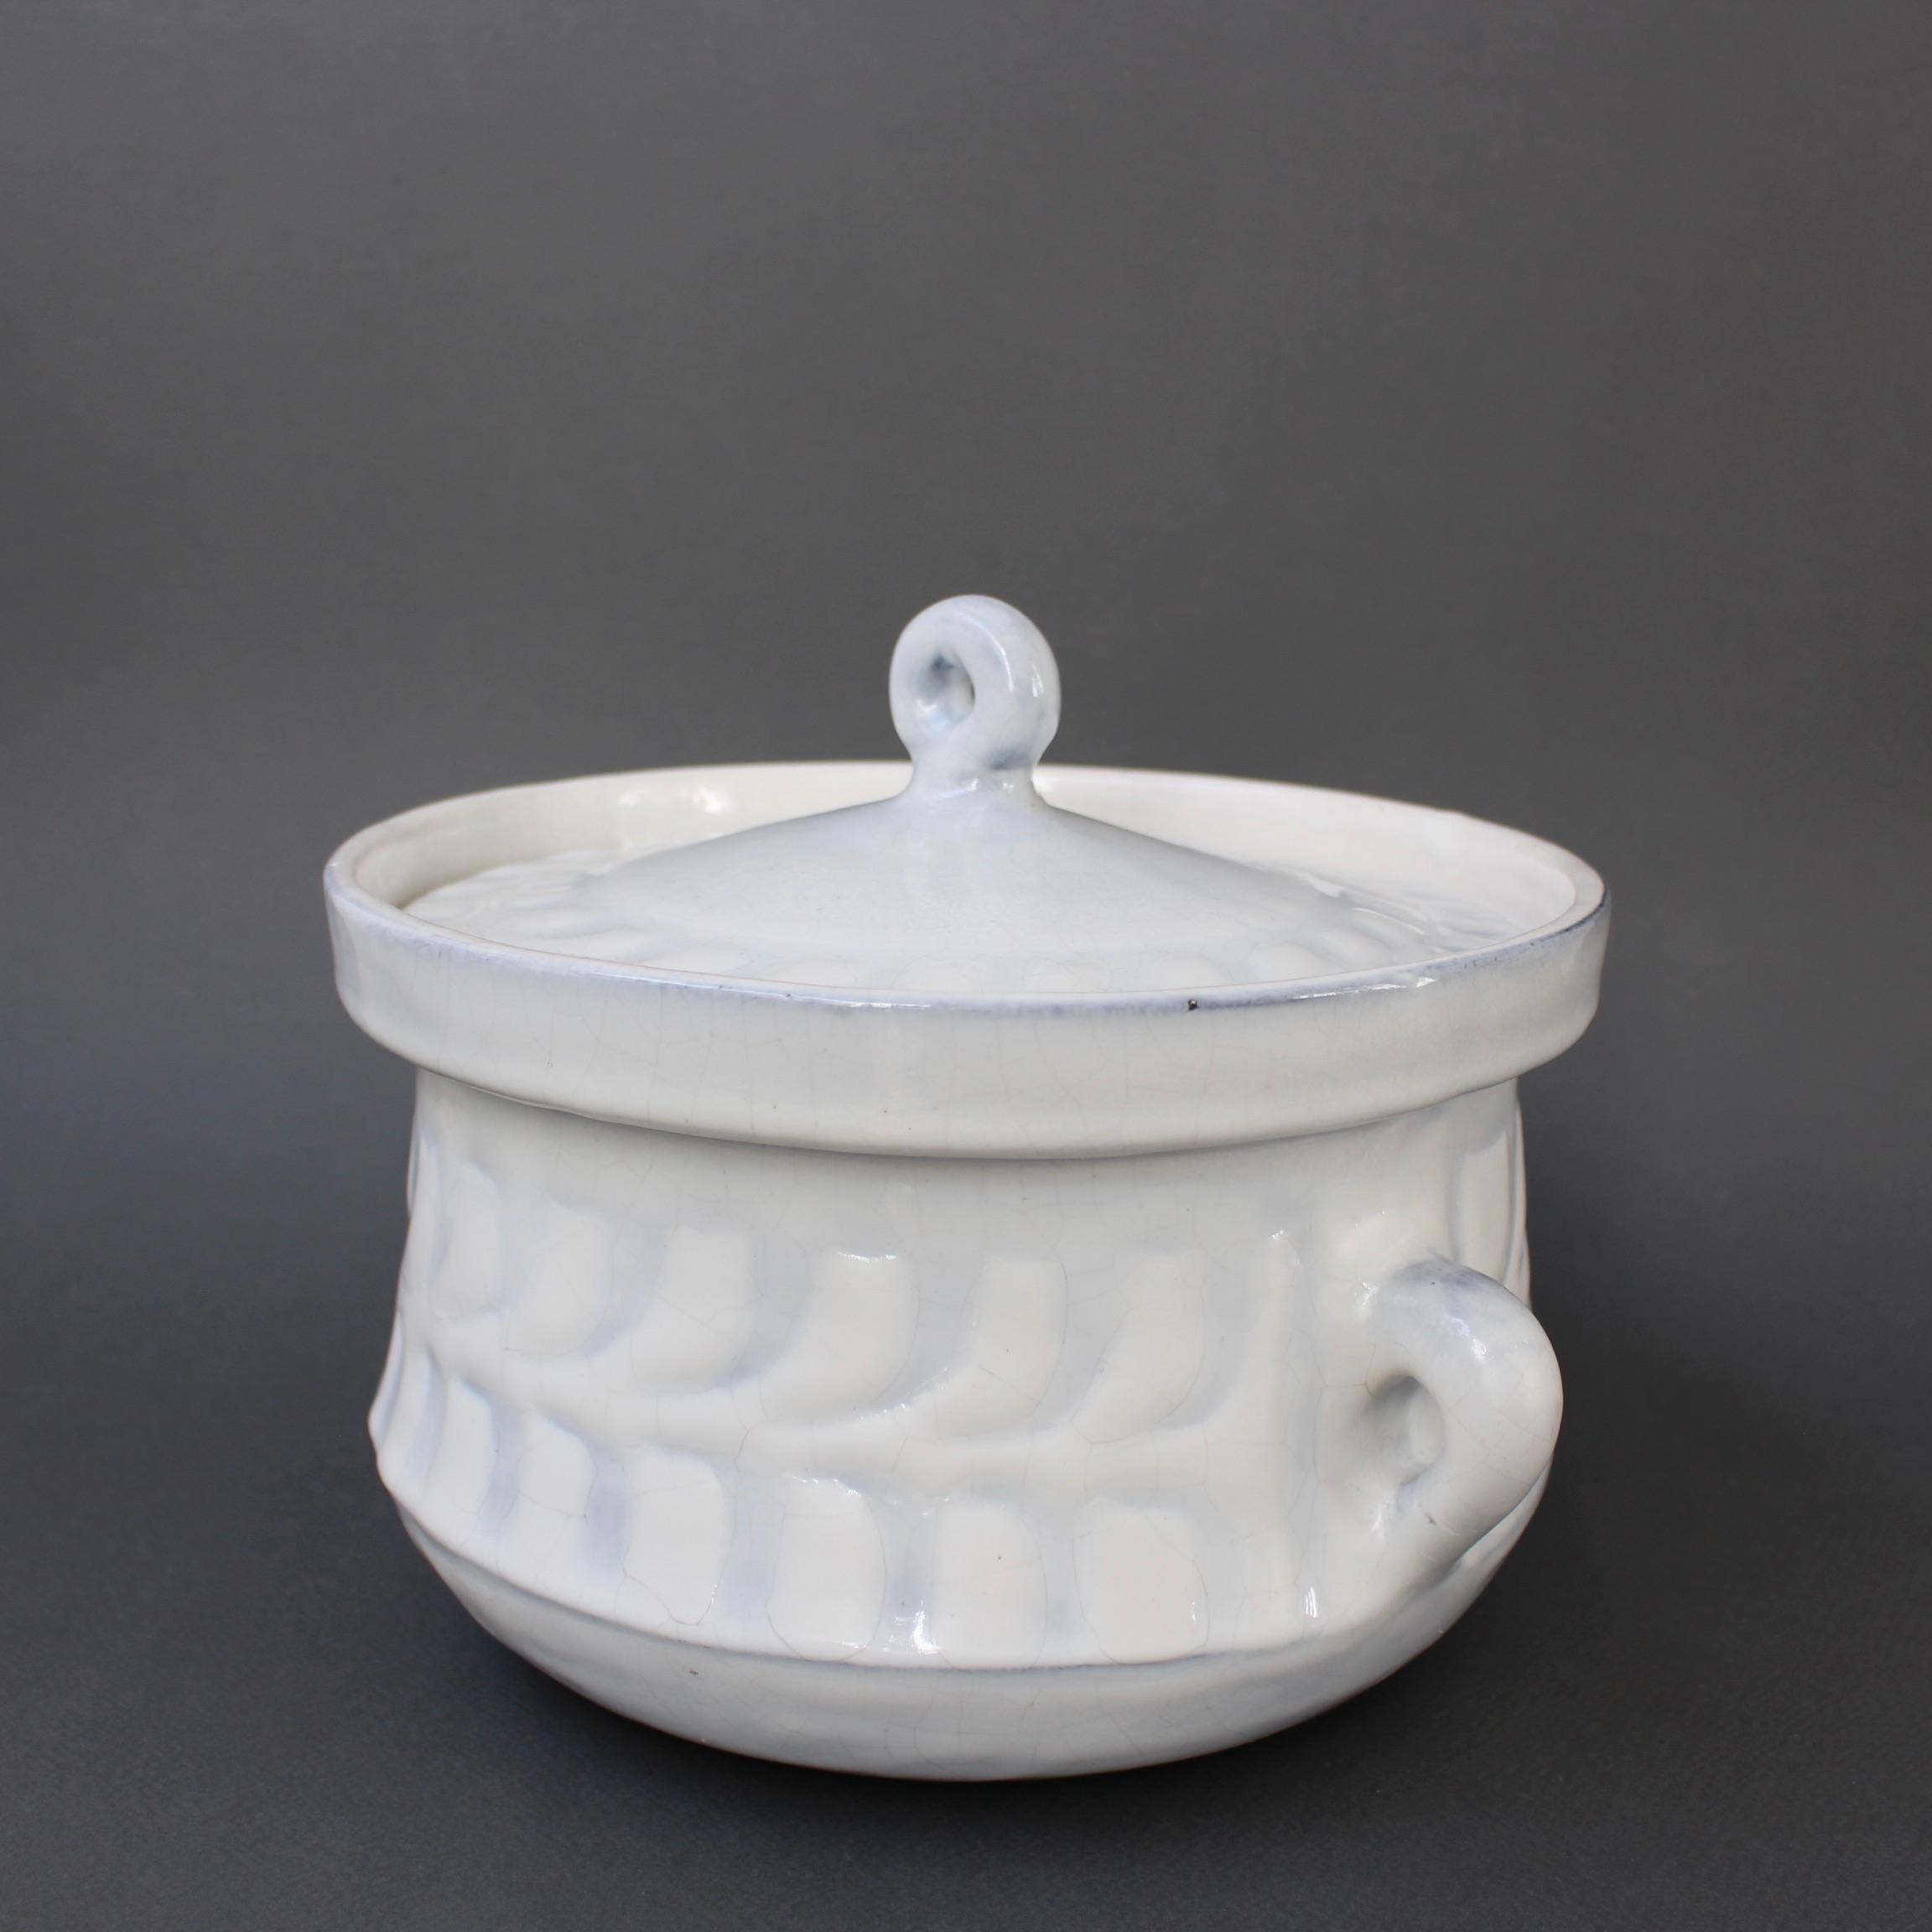 Vintage French Ceramic Tureen by Roger Capron, 'circa 1960s' In Good Condition For Sale In London, GB